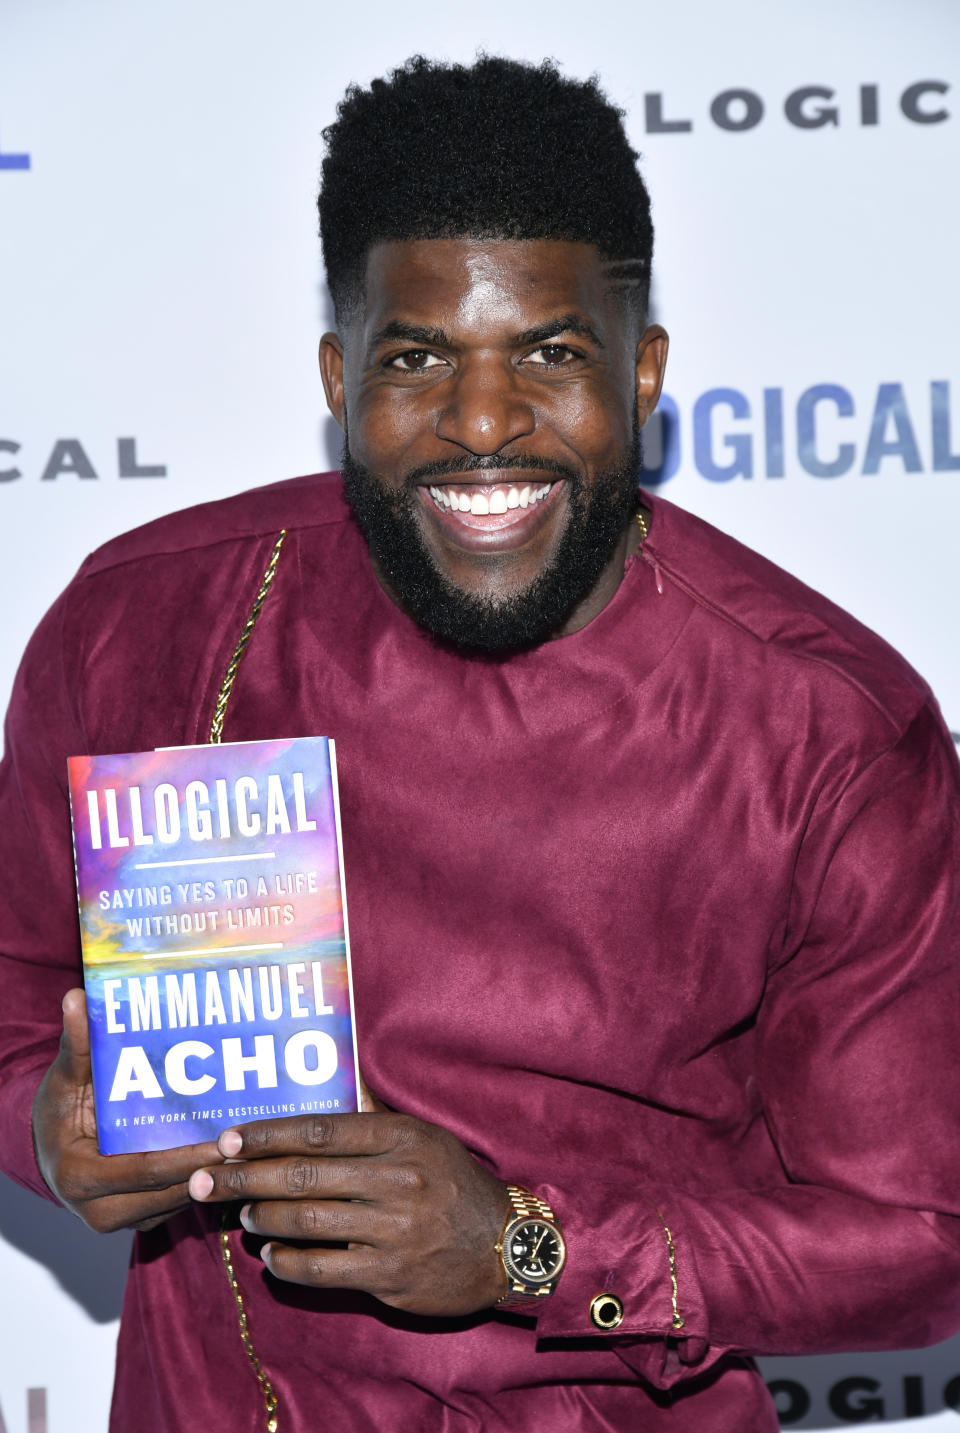 Emmanuel Acho Holding A Copy Of His Book 'Illogical'